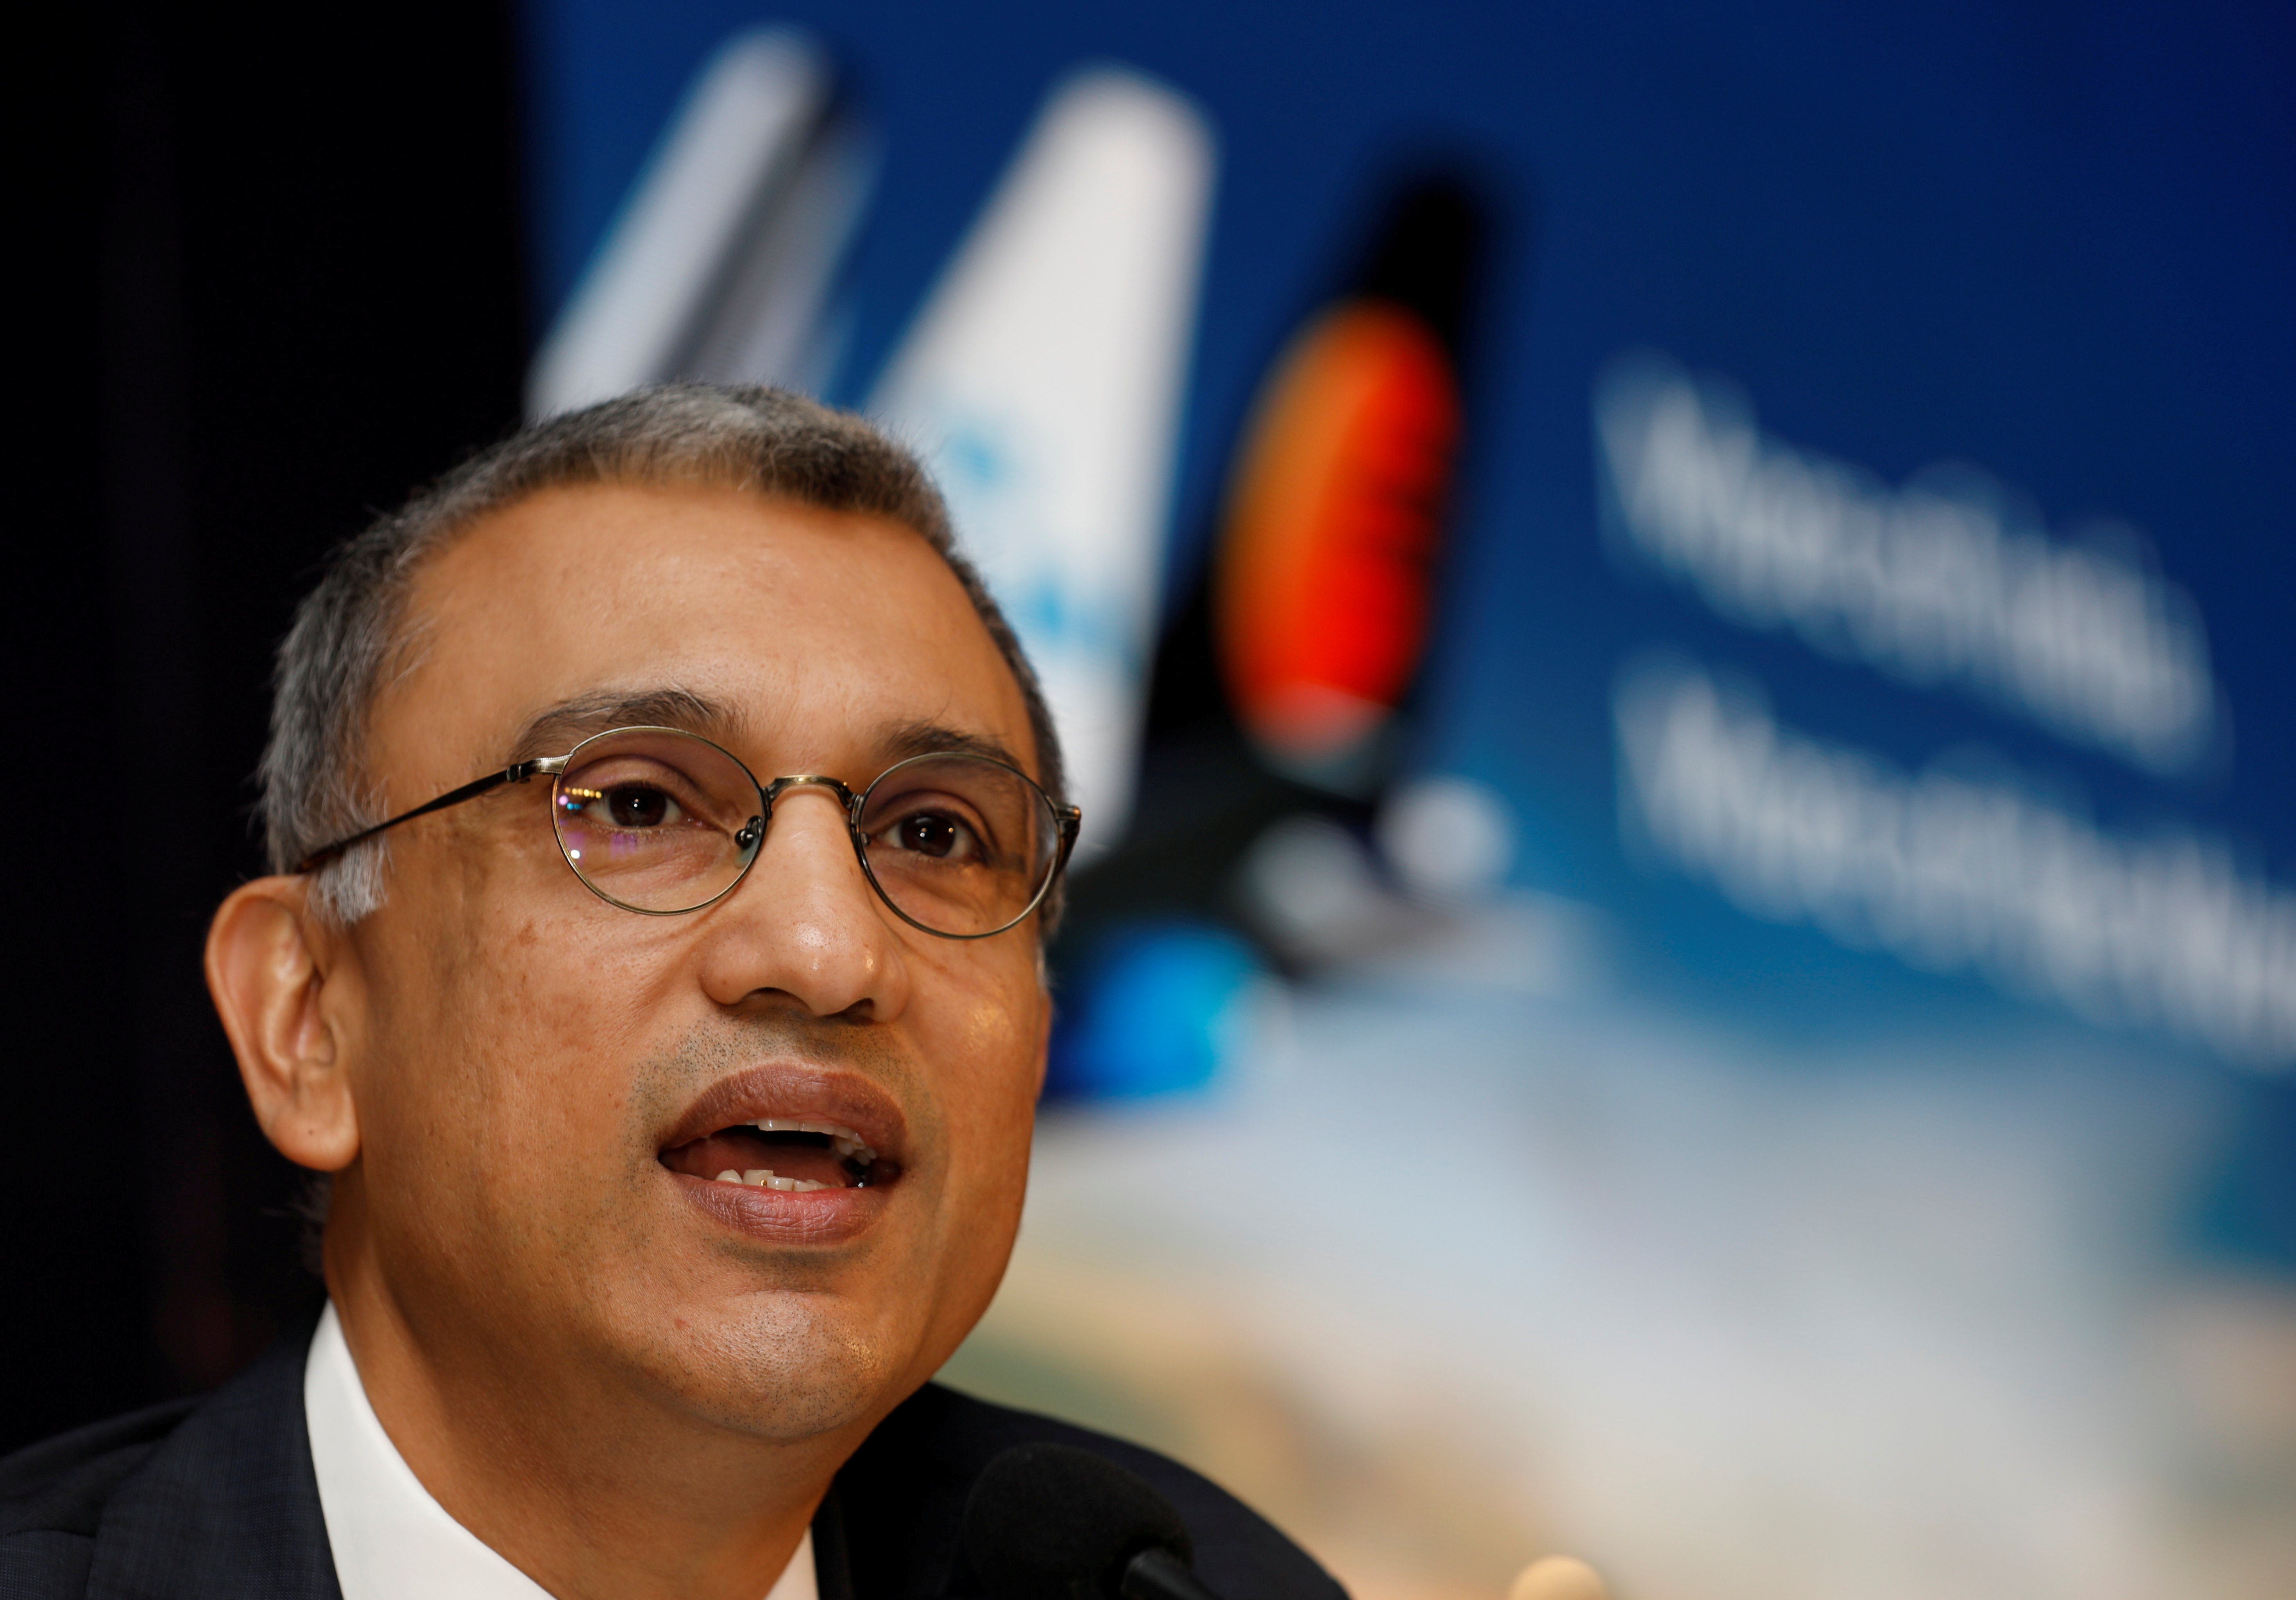 Vinay Dube, CEO of Jet Airways speaks during a news conference in Mumbai